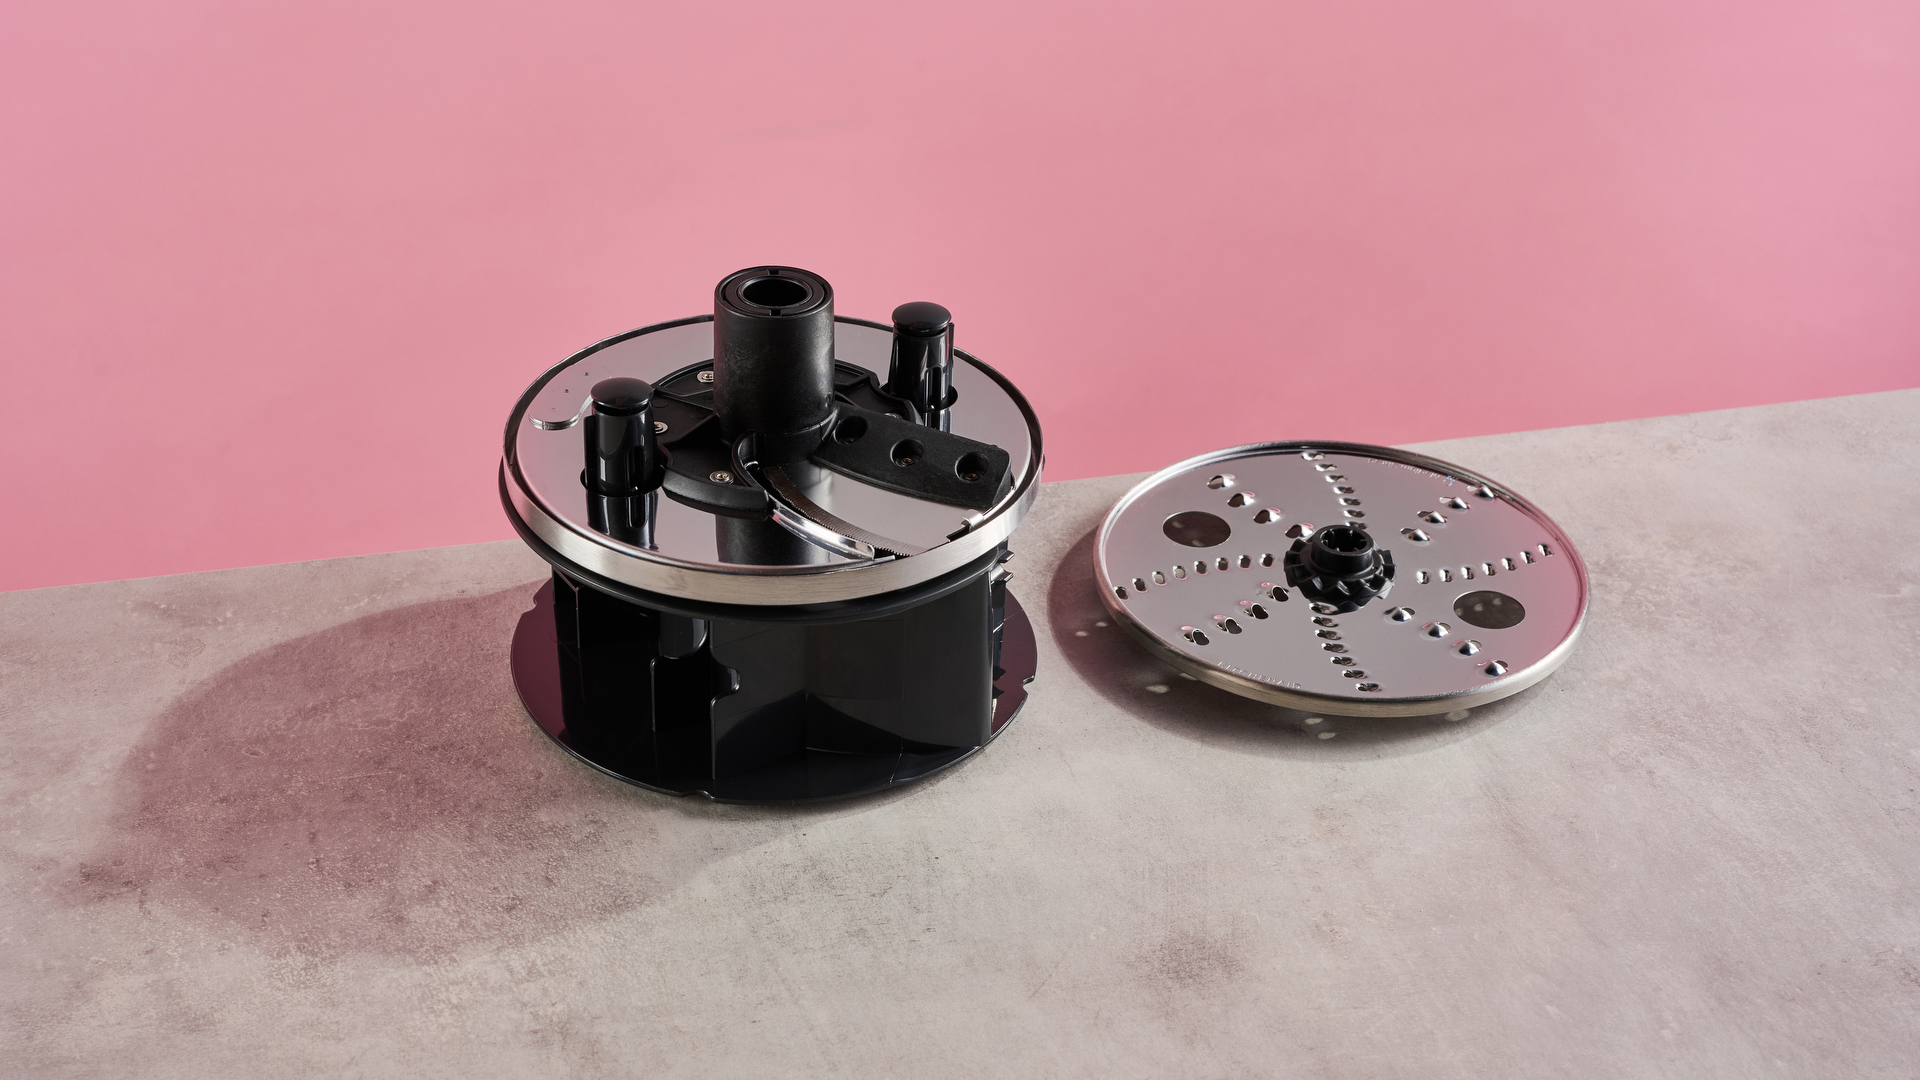 Image shows the black plastic storage caddy from the KitchenAid 13 cup food processor. It has the adjustable slicing disc on the top, and the reversible grating disc on the grey stone-effect surface on the right. It is photographed against a pink background.